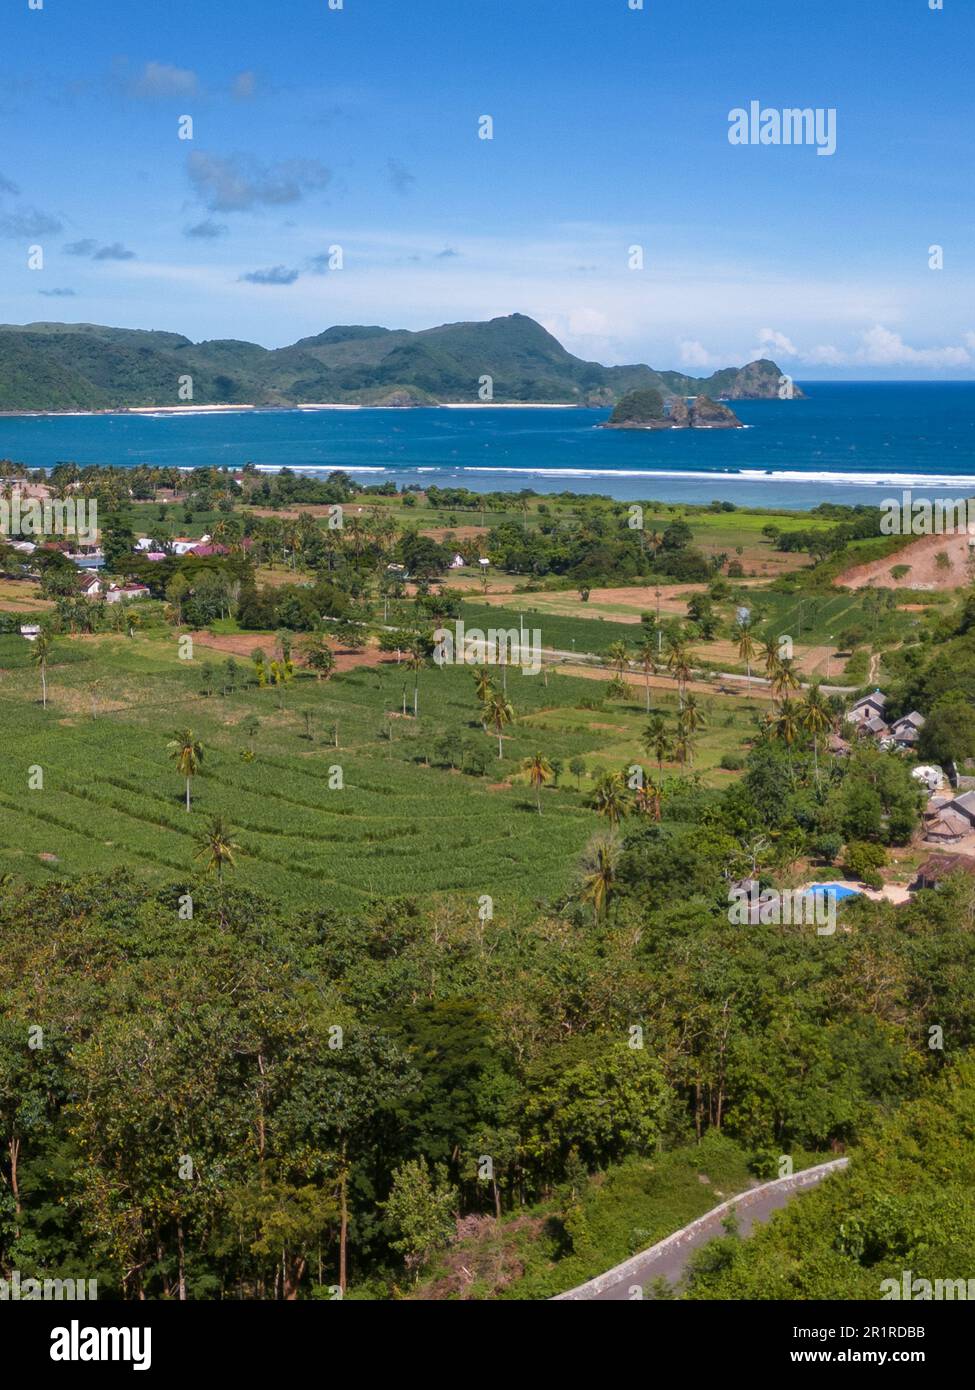 Lush rural landscape with Selong belanak beach in distance, Lombok, Indonesia Stock Photo